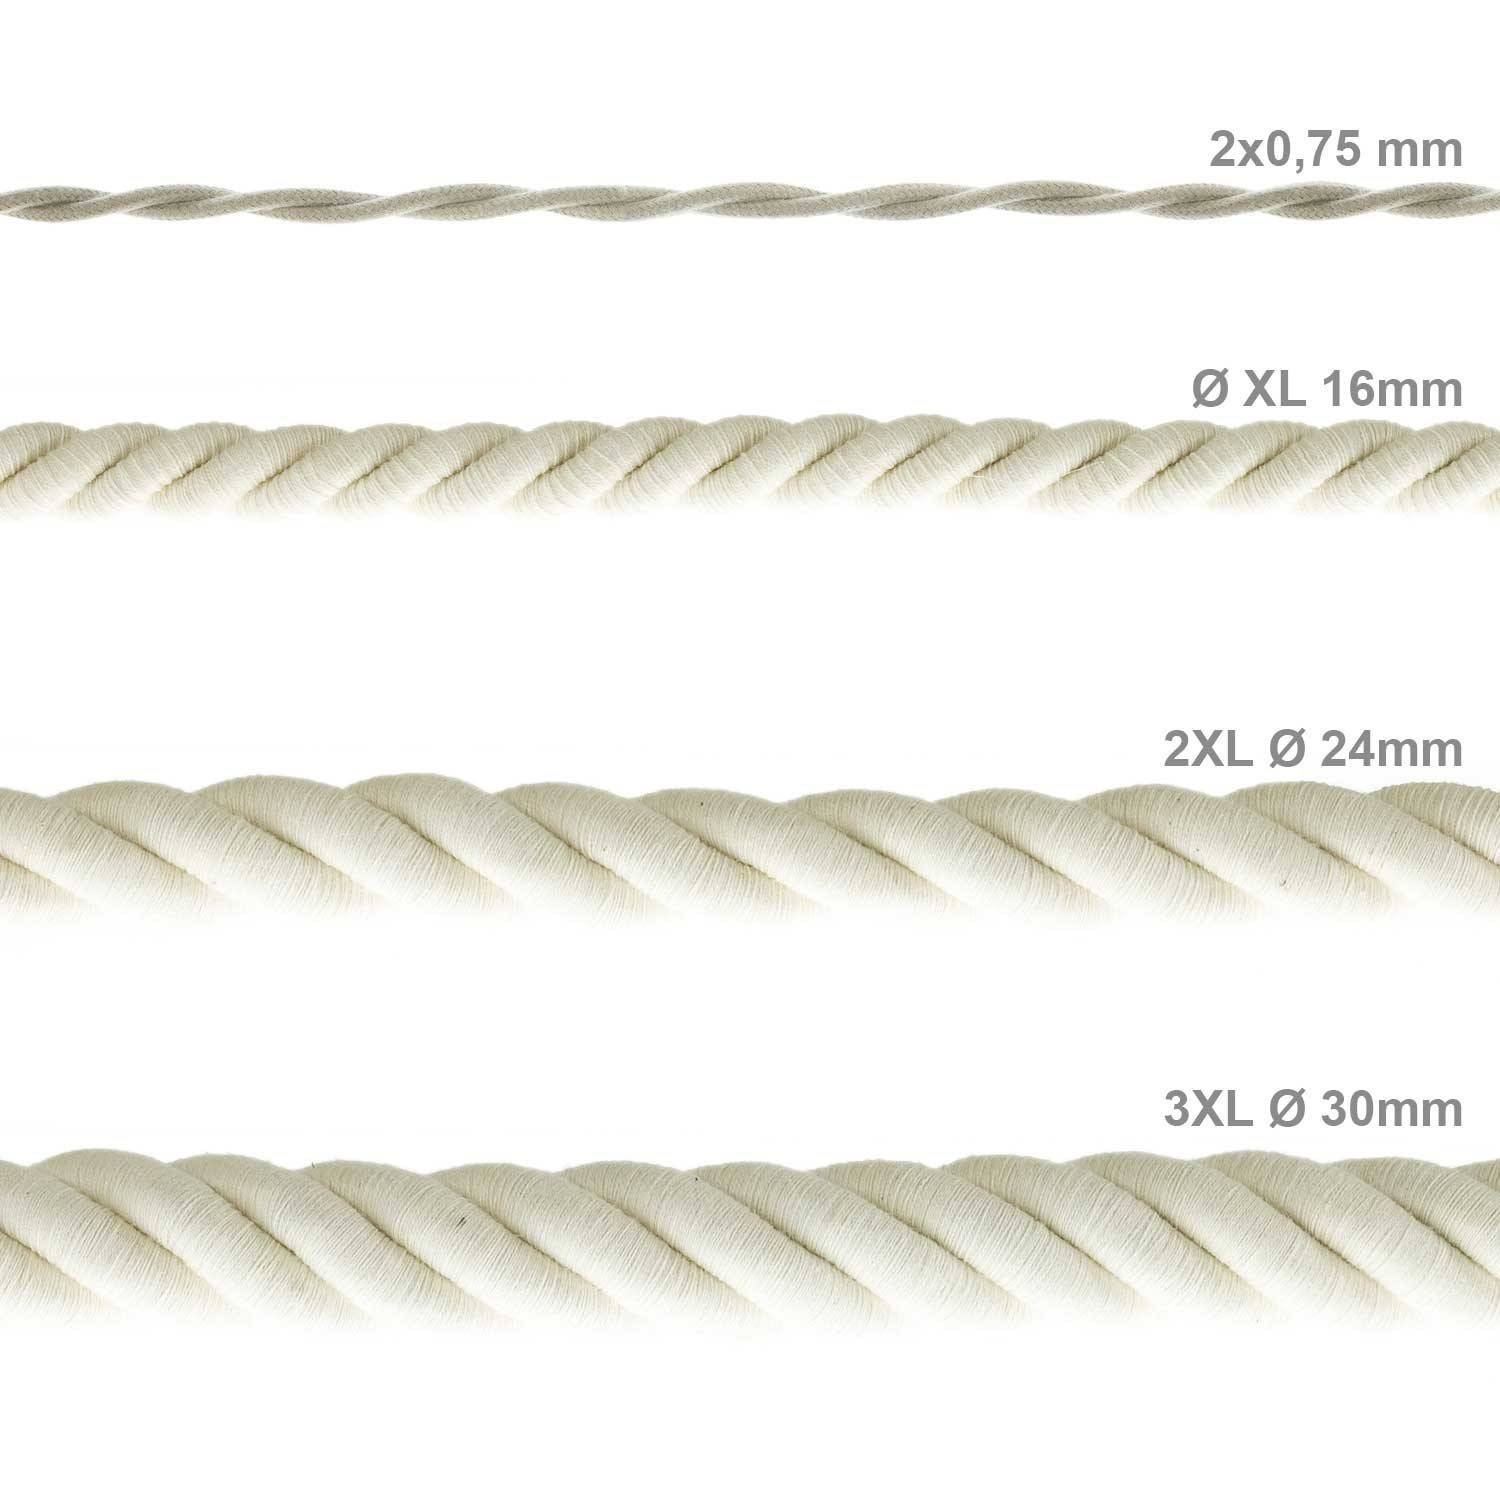 2XL electrical cord, electrical cable 3x0,75. Raw cotton fabric covering. Diameter 24mm.